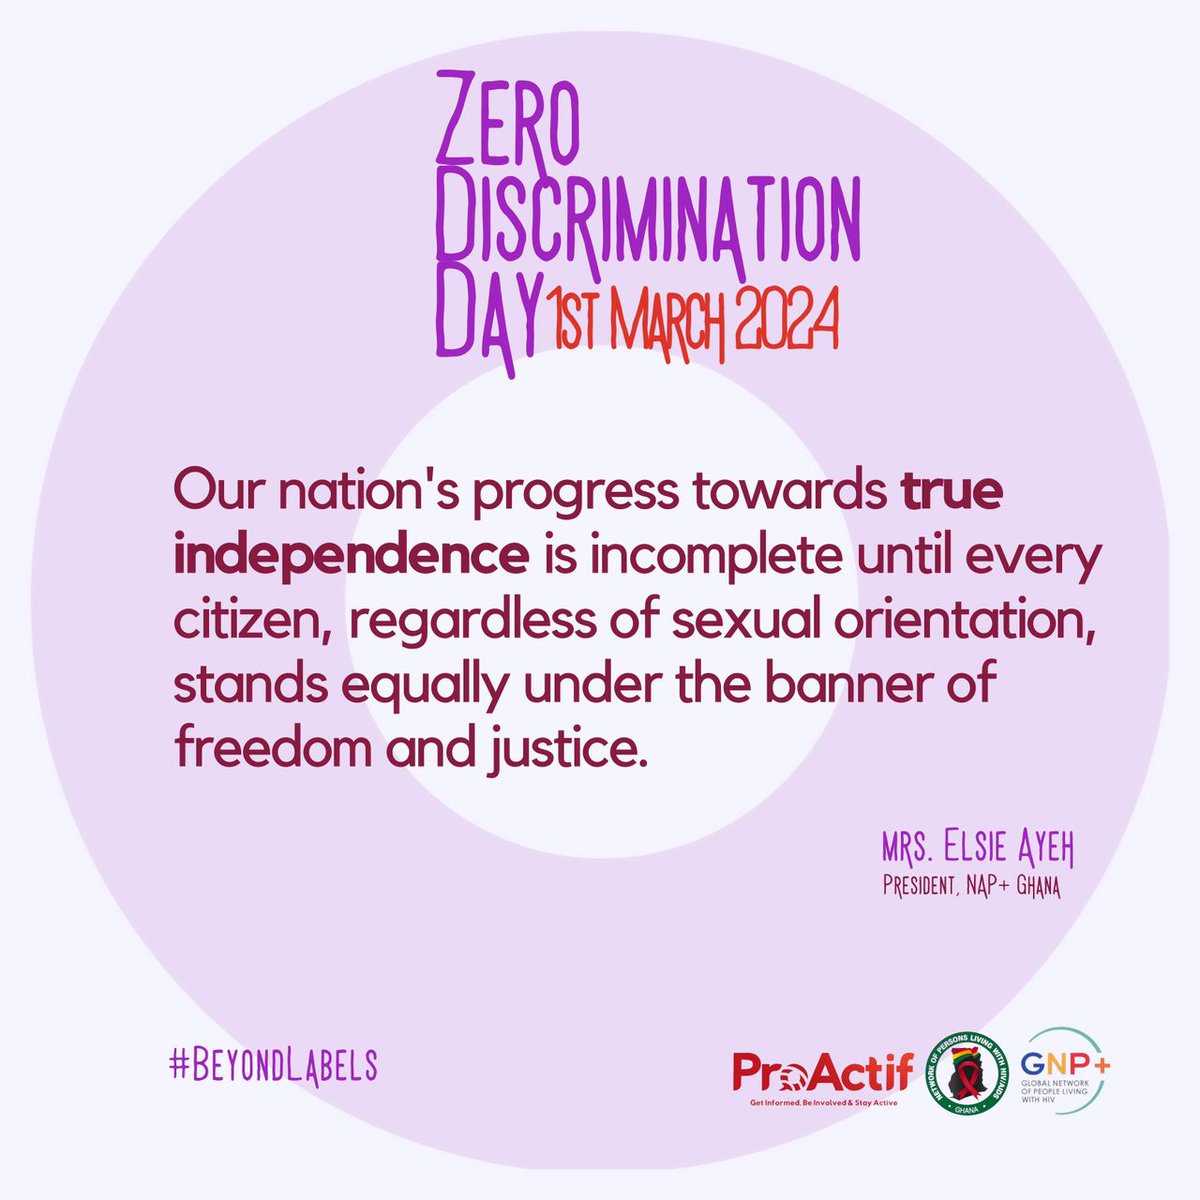 Equality in Ghana is hollow if it excludes the rights of every individual, irrespective of their sexual orientation. Celebrating zero discrimination means affirming the dignity and rights of all Ghanaians, including those marginalized due to their sexual orientation.